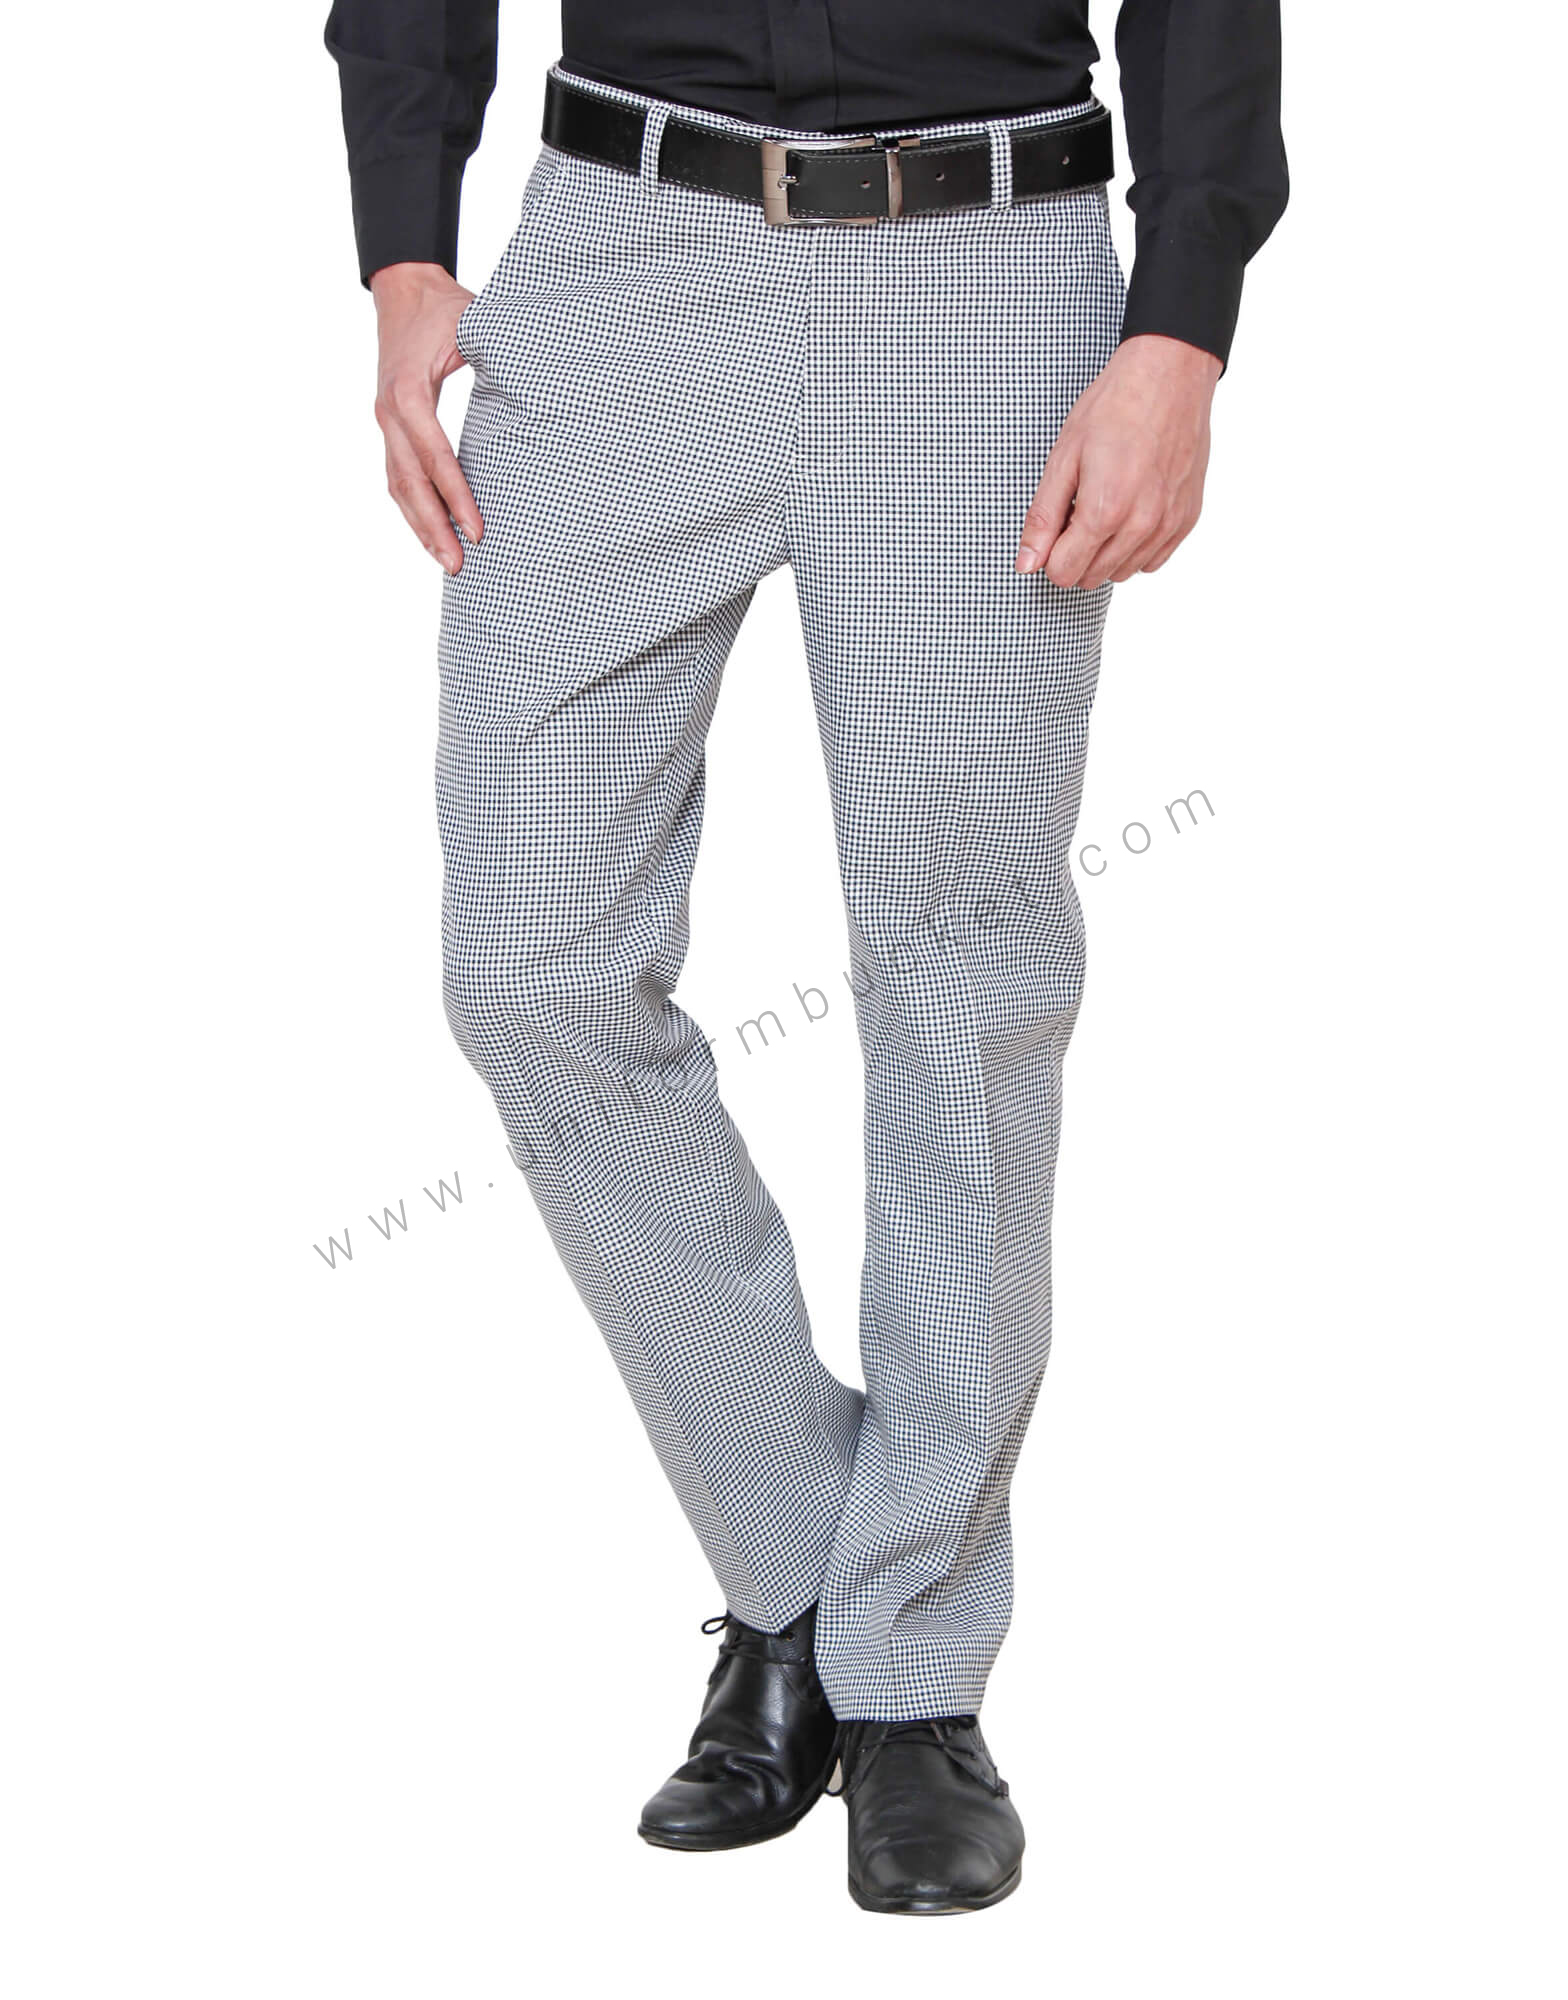 Buy The Indian Garage Co Trousers online - 236 products | FASHIOLA.in